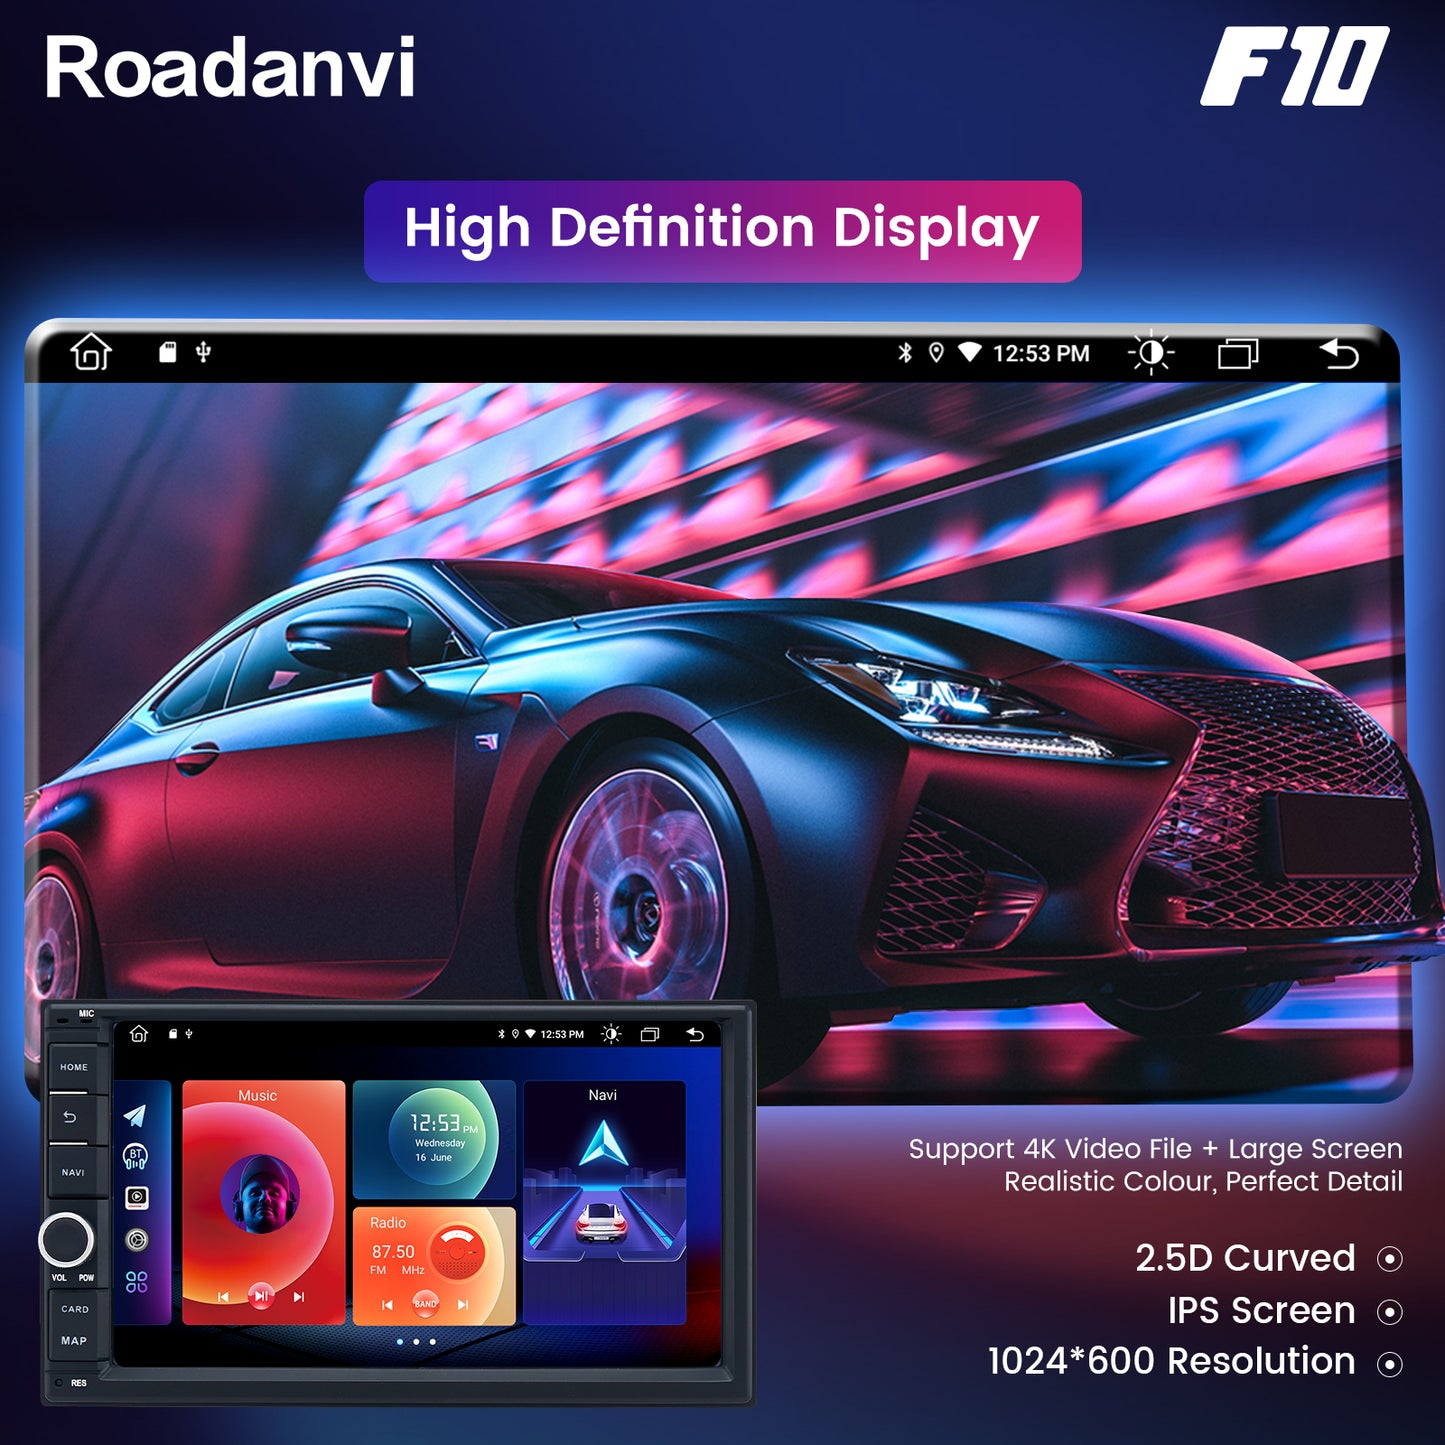 Roadanvi F10 For Toyota Universal Camry Corolla Car Stereo Apple Carplay Android 10 Touch screen 4G RAM DSP TDA7851 GPS Head Unit